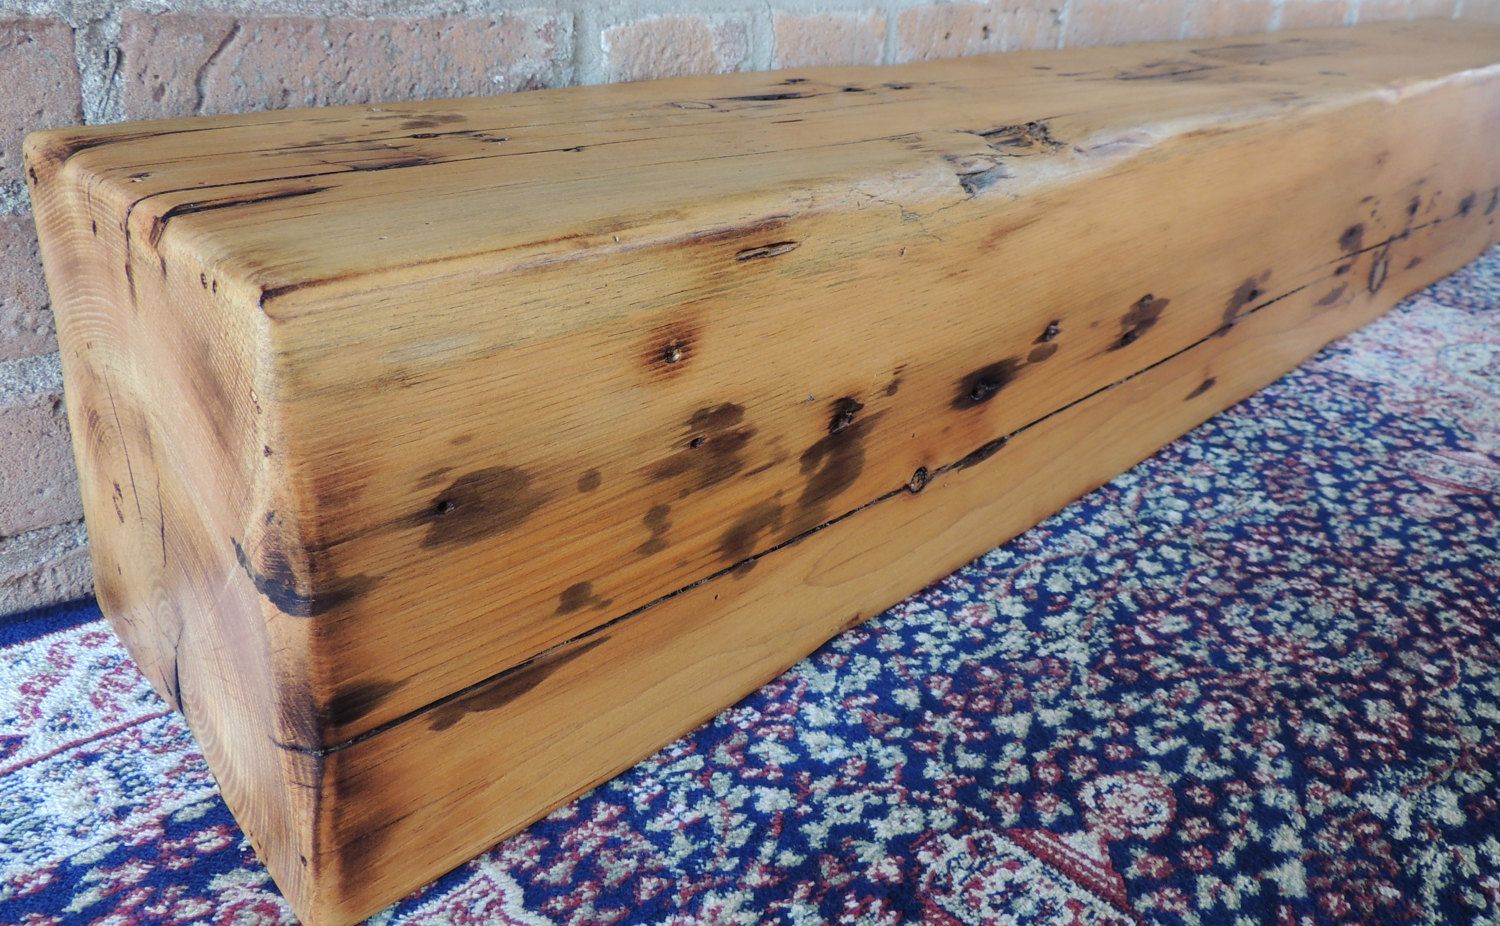 Salvaged Fireplace Mantels Beautiful Reclaimed Barn Beam Mantel 65" X 8" X 8" Fireplace Mantel